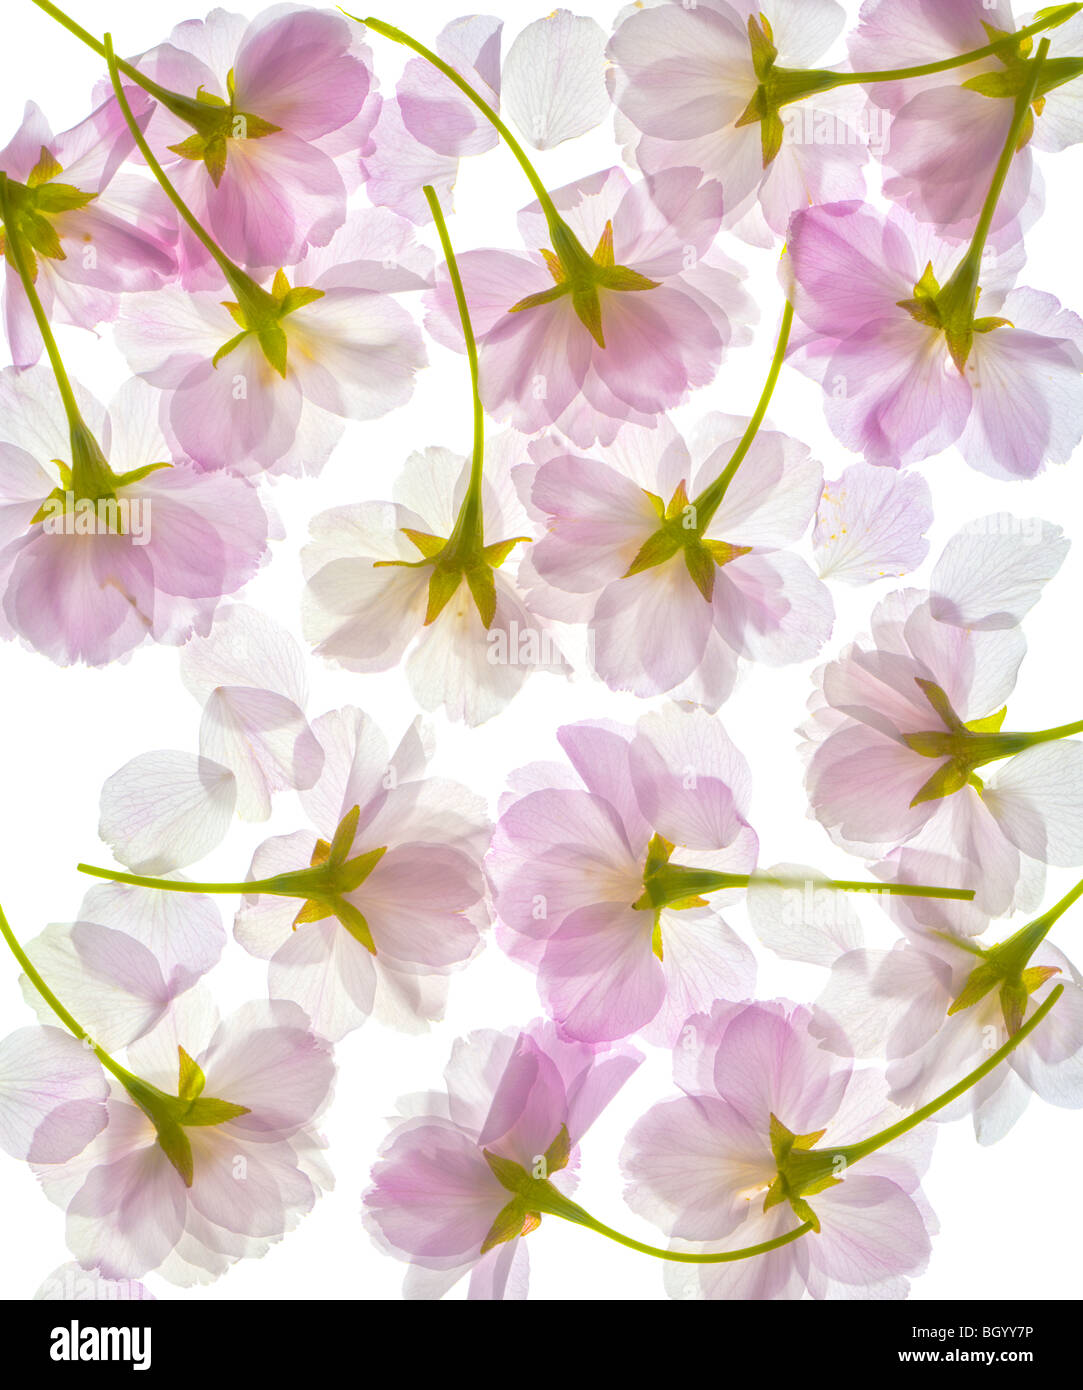 Completely translucent cherry blossom, blossoms, flowers petals. Pattern isolated on a white background. Close up. cut out Stock Photo